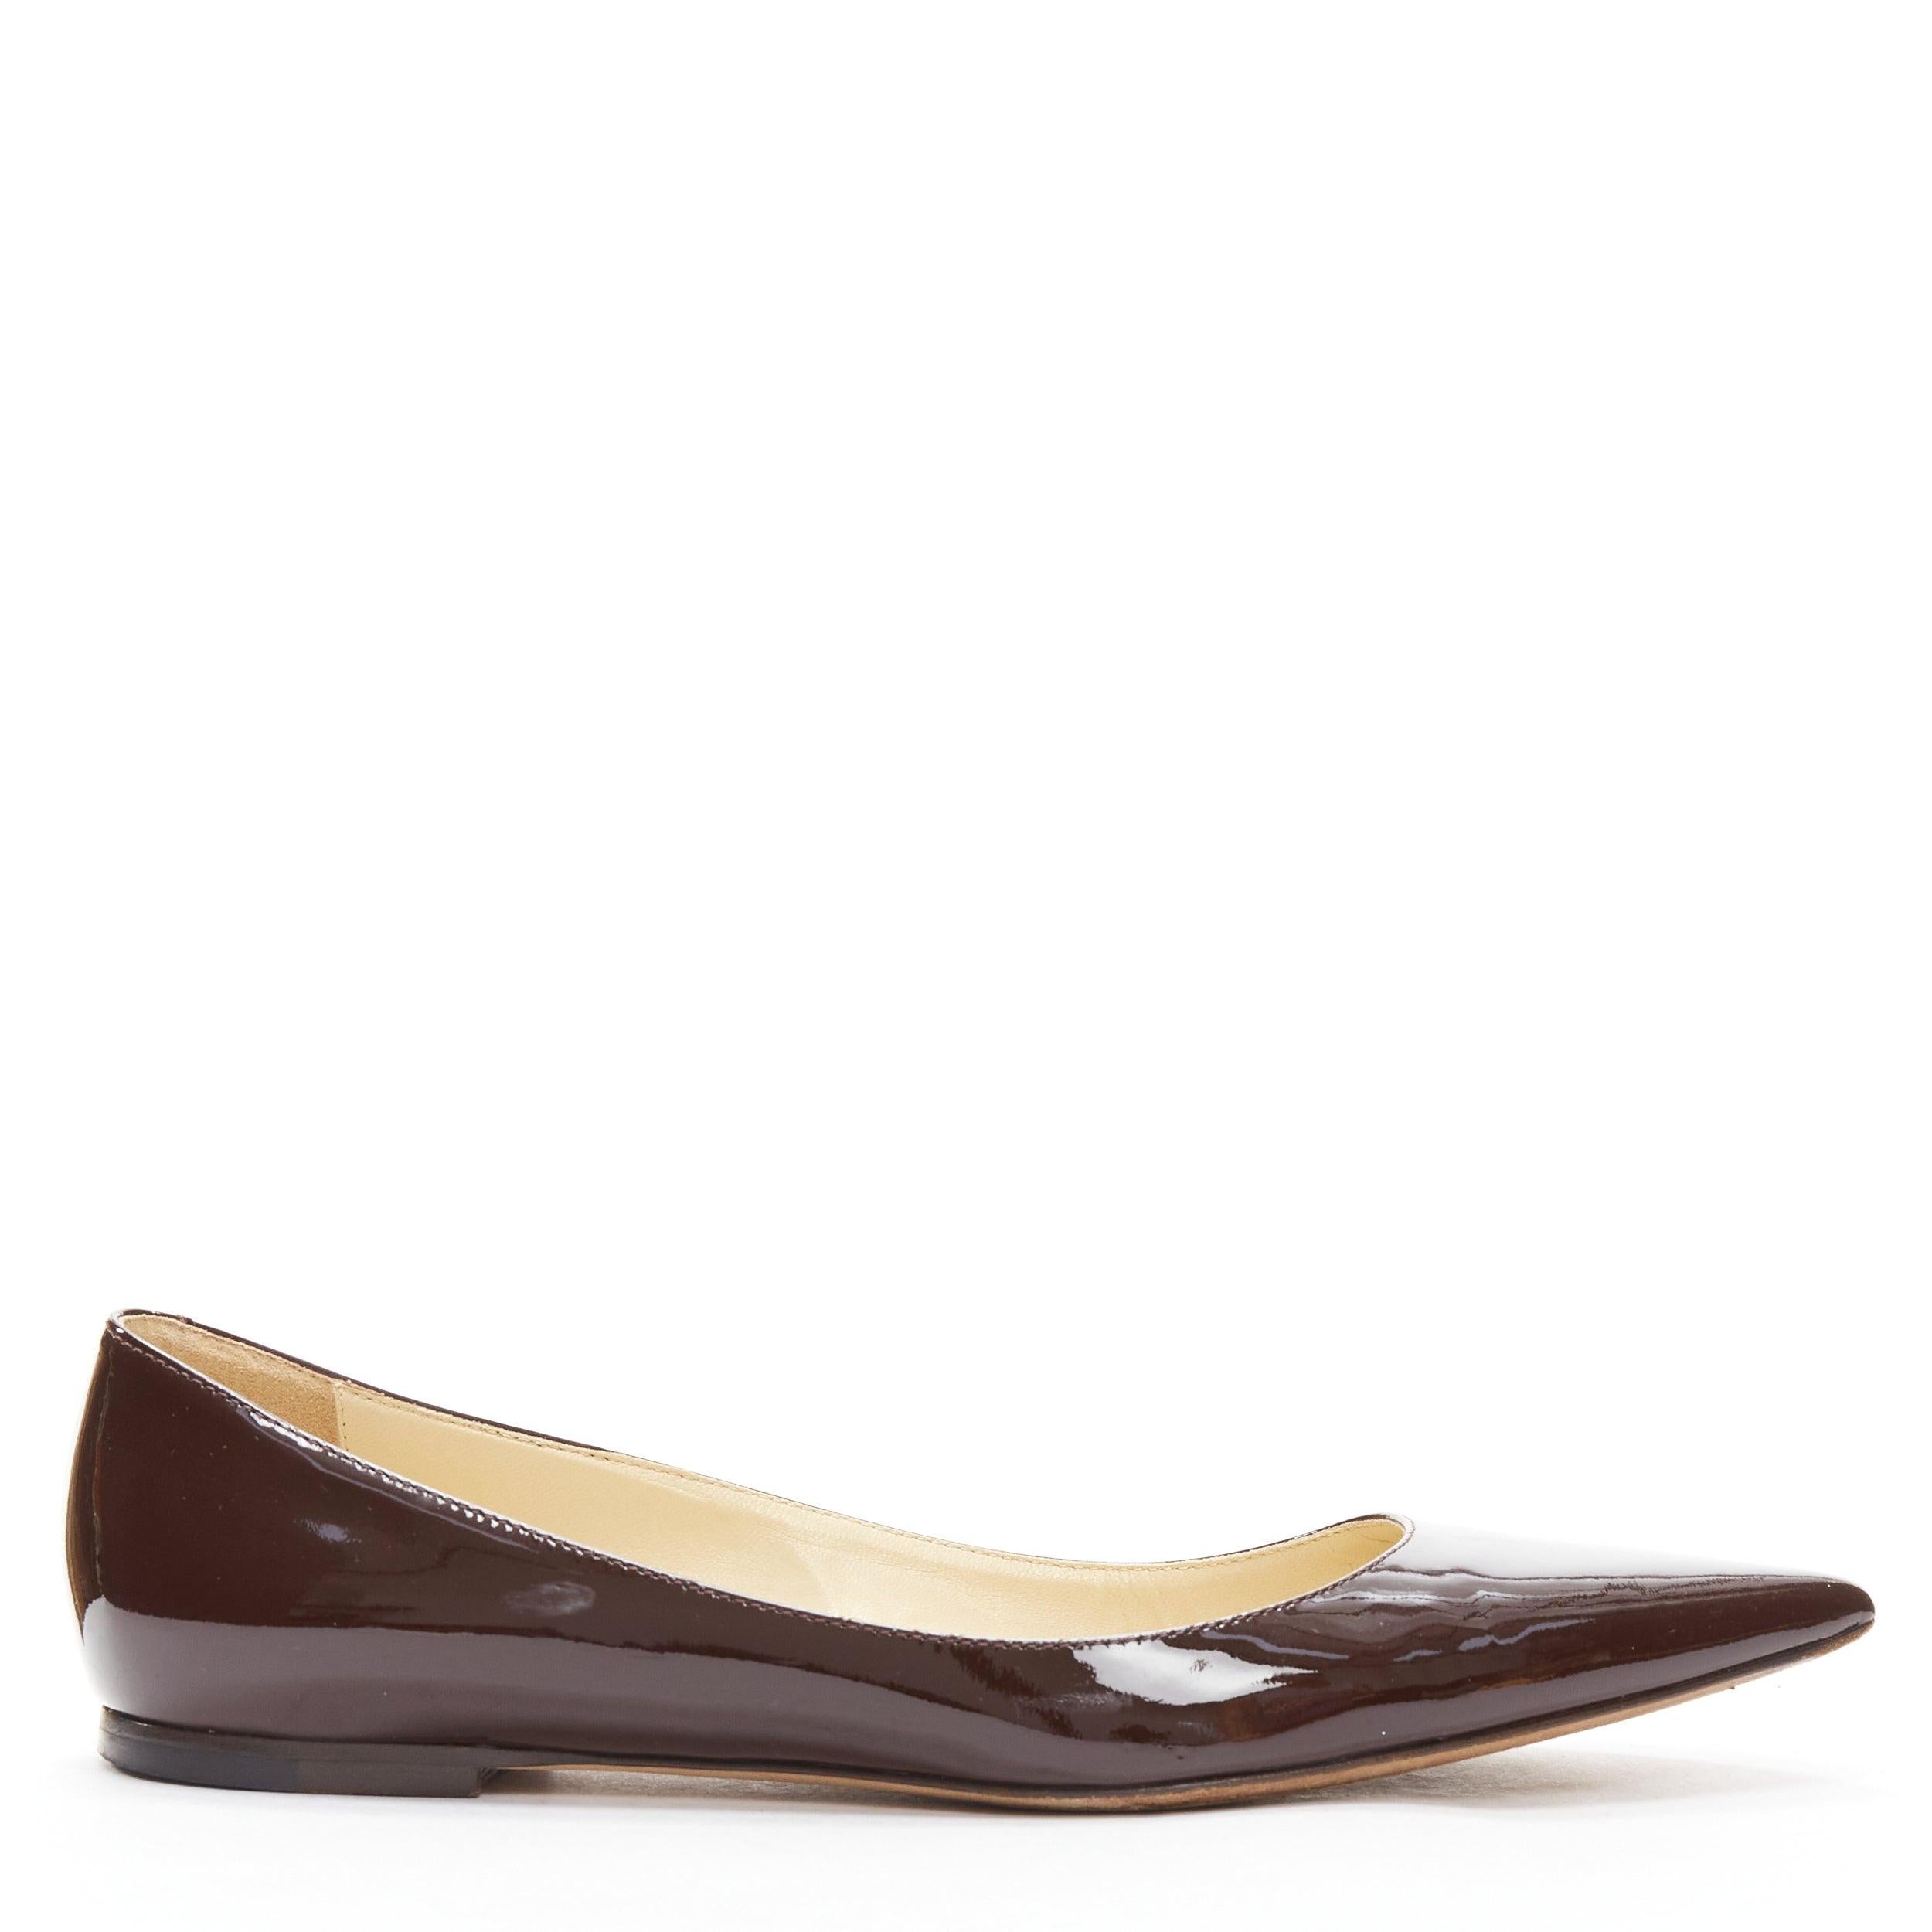 JIMMY CHOO brown patent leather pointed toe simple flats EU37.5
Reference: SNKO/A00370
Brand: Jimmy Choo
Material: Leather
Color: Brown
Pattern: Solid
Closure: Slip On
Lining: Nude Leather
Made in: Italy

CONDITION:
Condition: Very good, this item